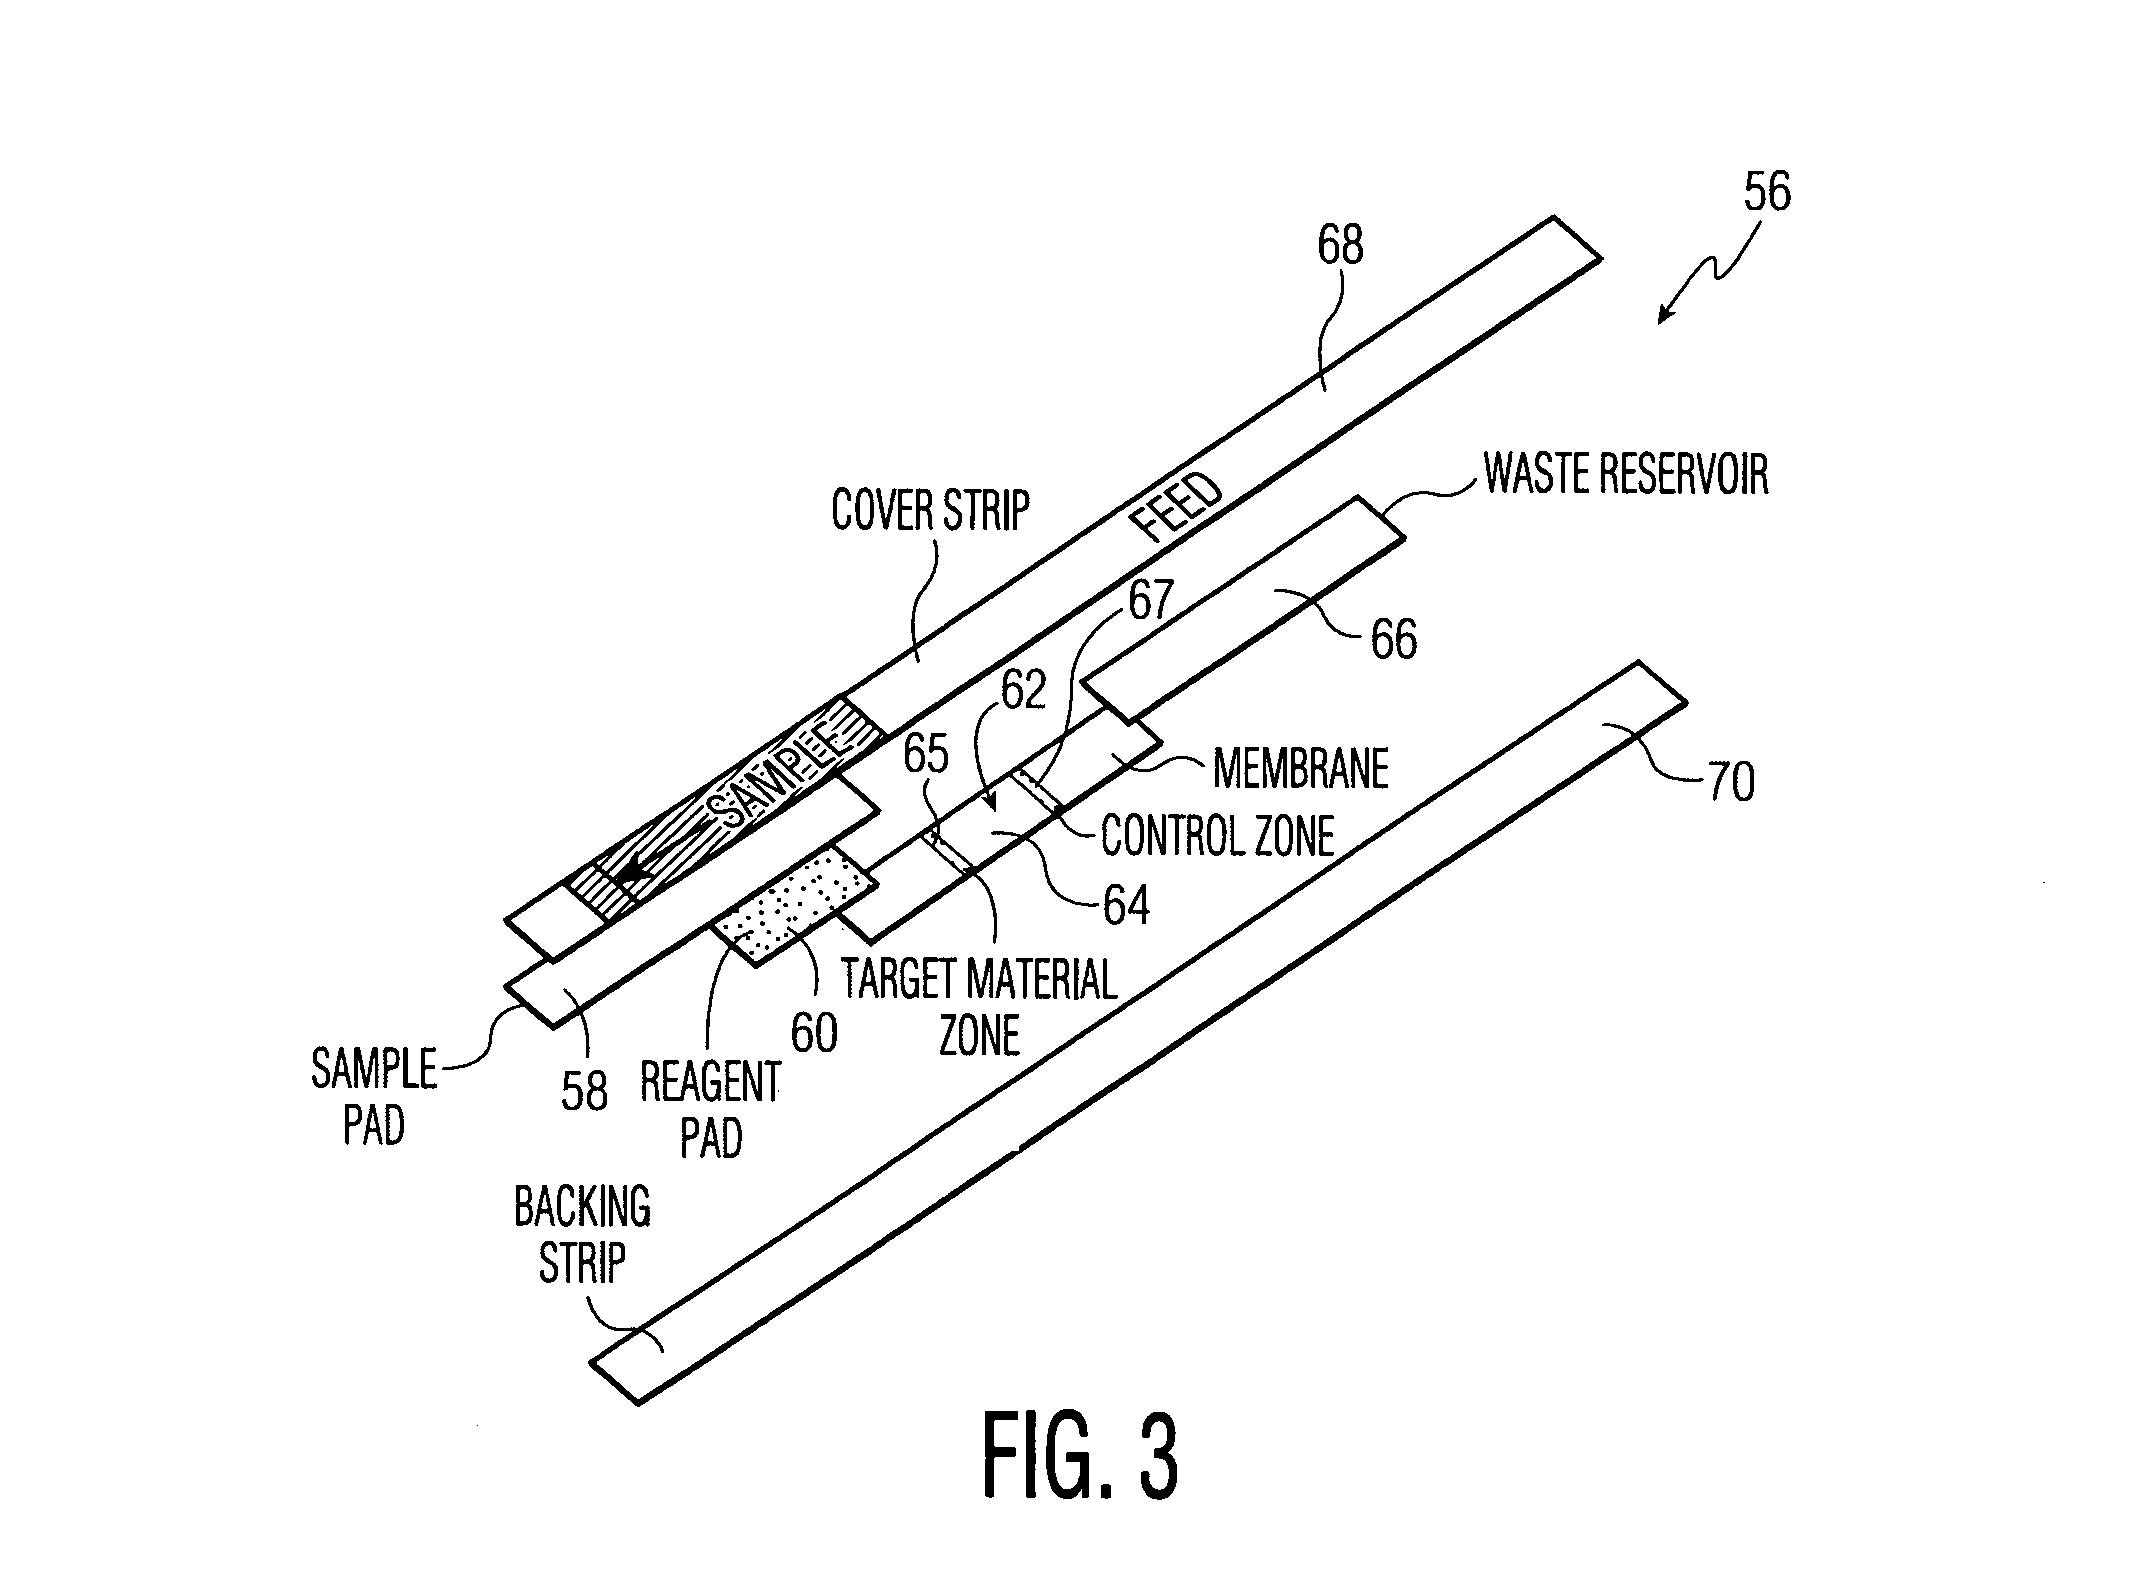 Consumer food testing device